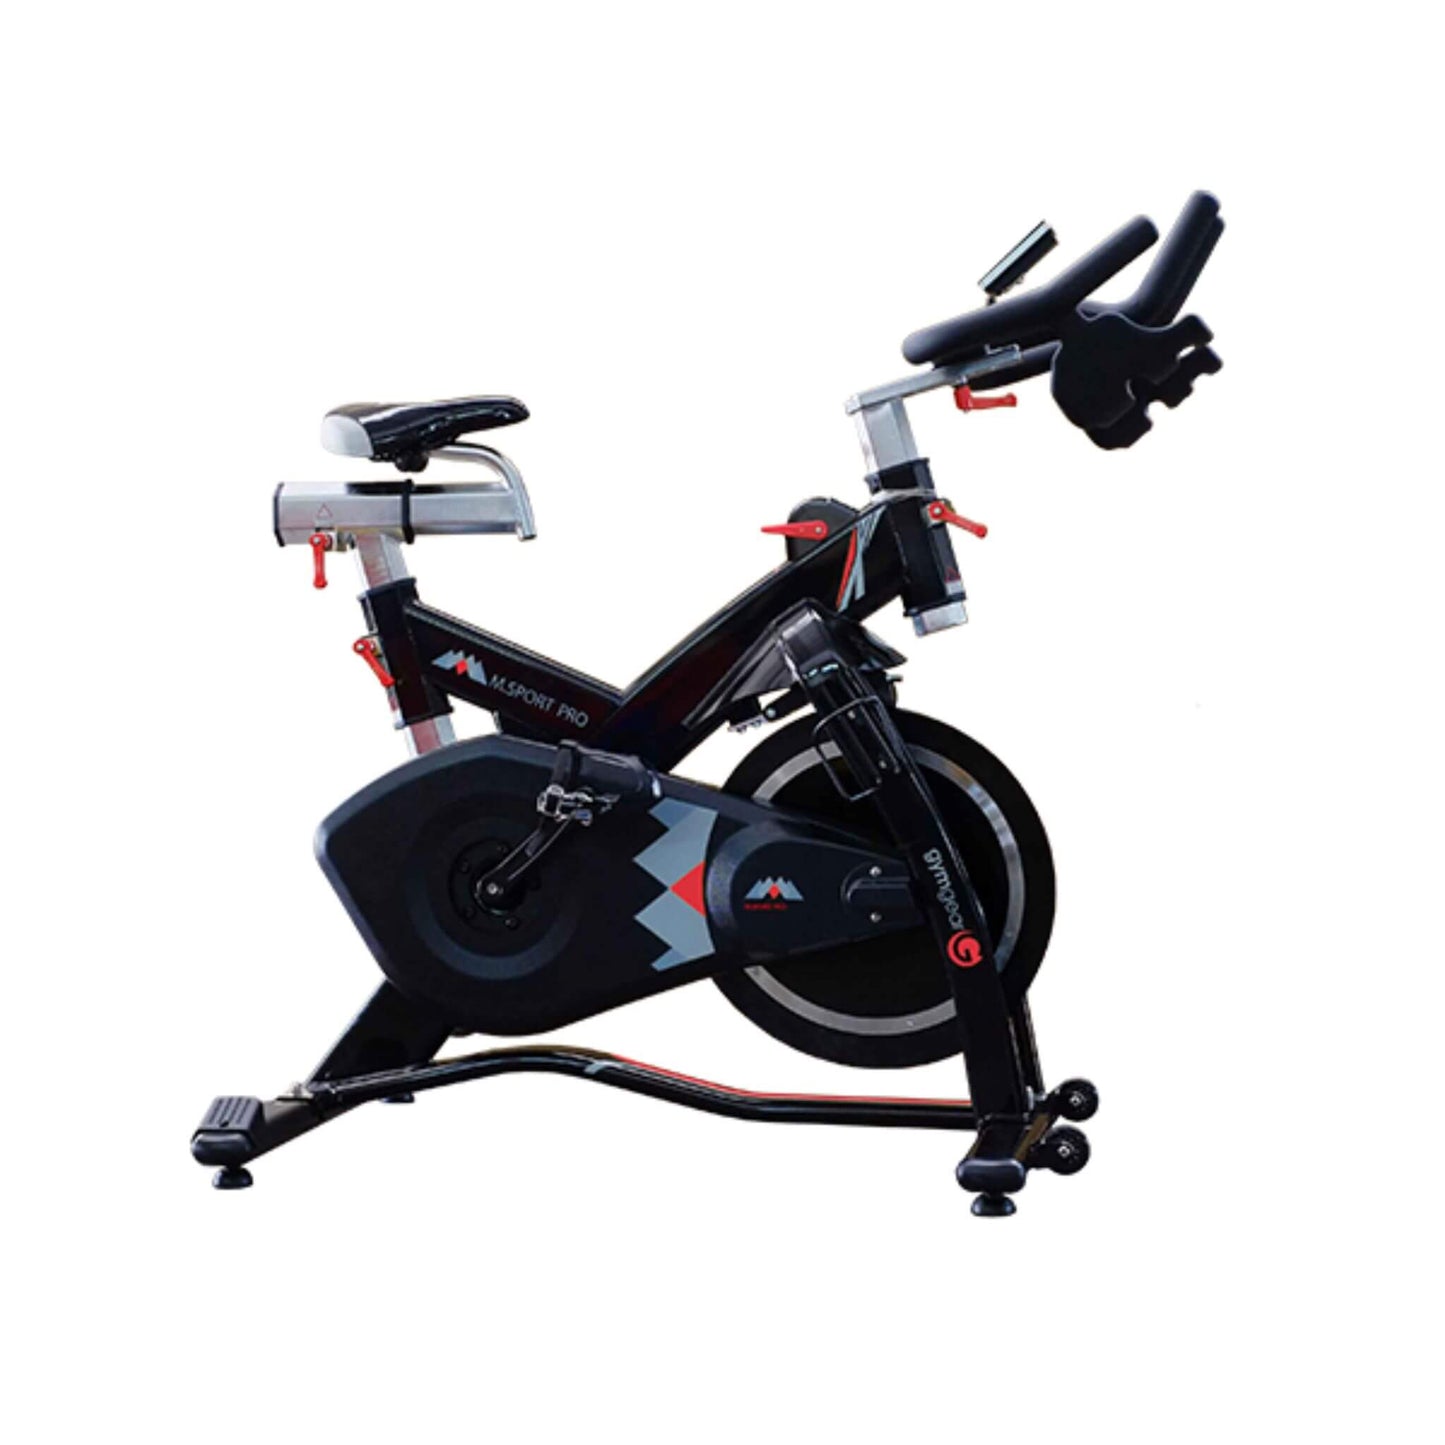 M Sport Pro Indoor Cycle bike spinning